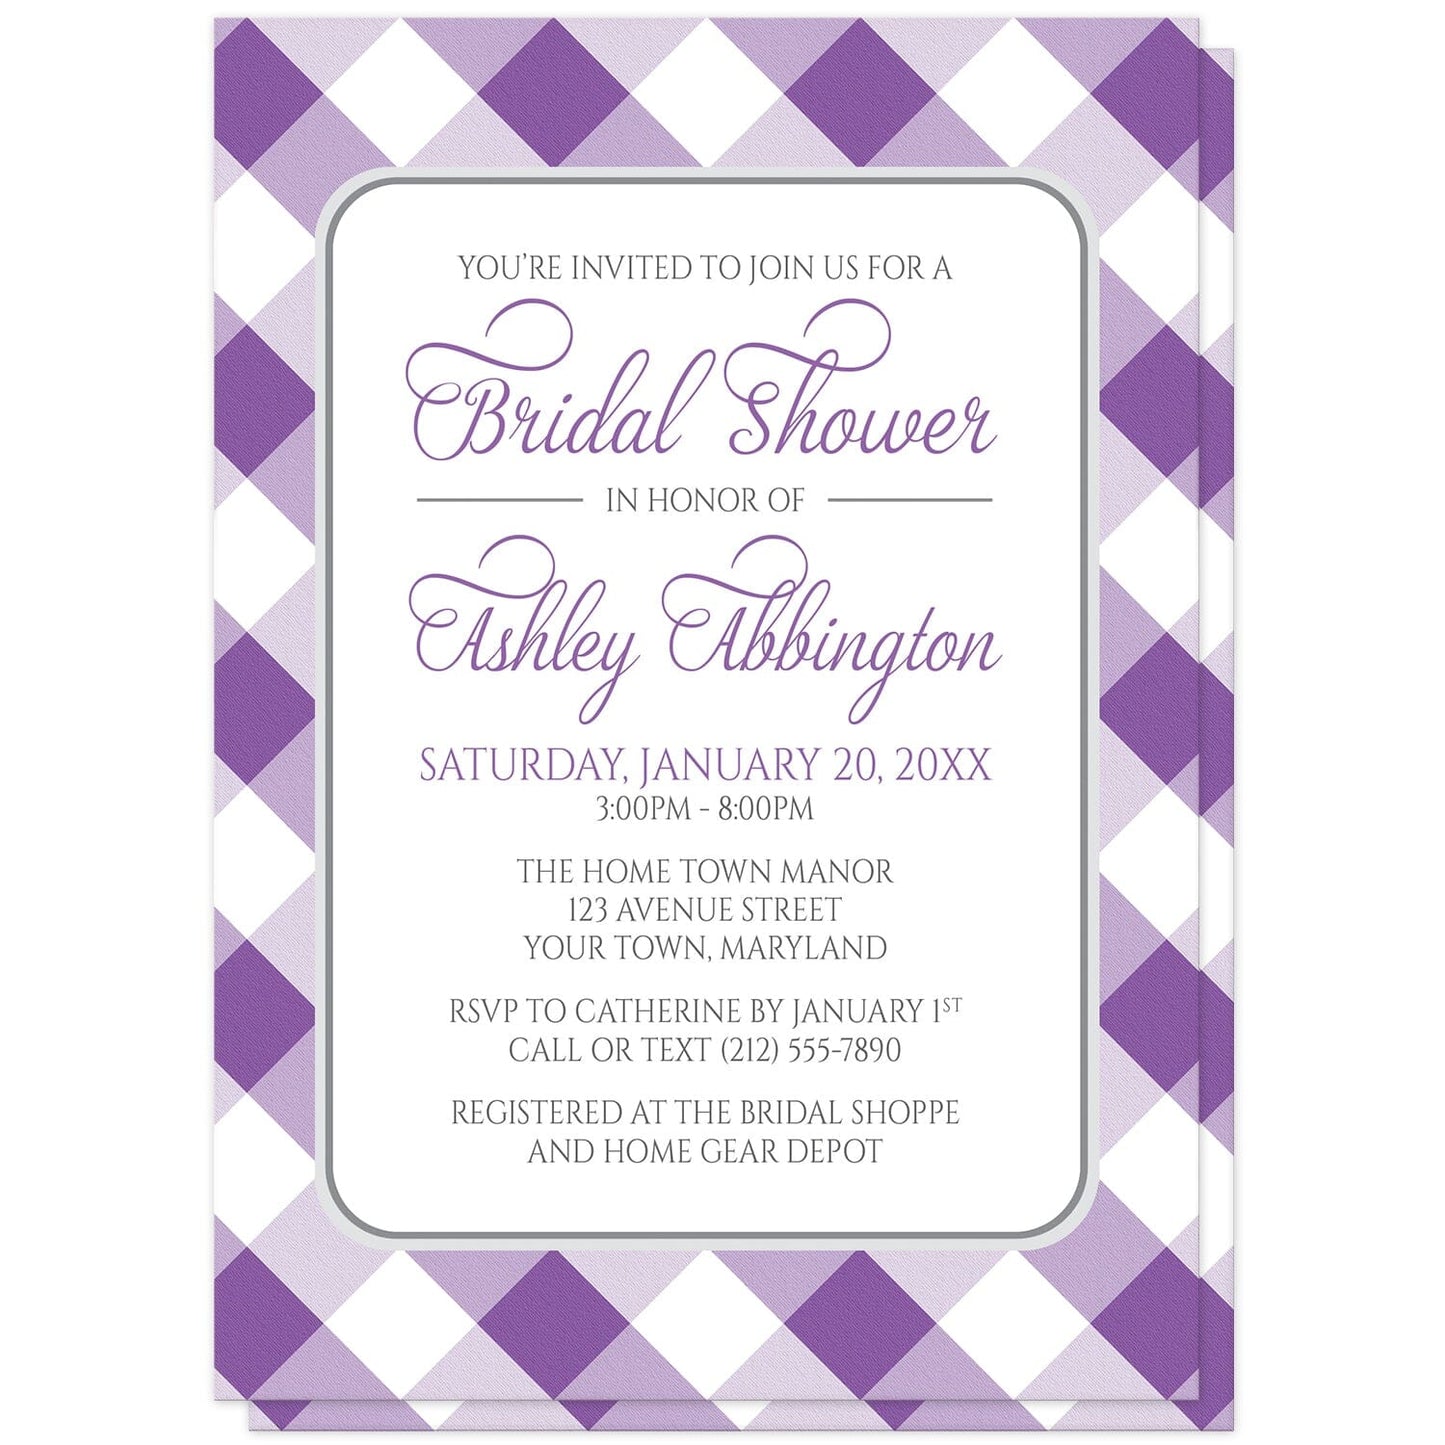 Purple Gingham Bridal Shower Invitations at Artistically Invited. Purple gingham bridal shower invitations with your personalized bridal shower celebration details custom printed in purple and gray inside a white rectangular area outlined in gray. The background design is a diagonal purple and white gingham pattern which is also printed on the back side of the invitations. 